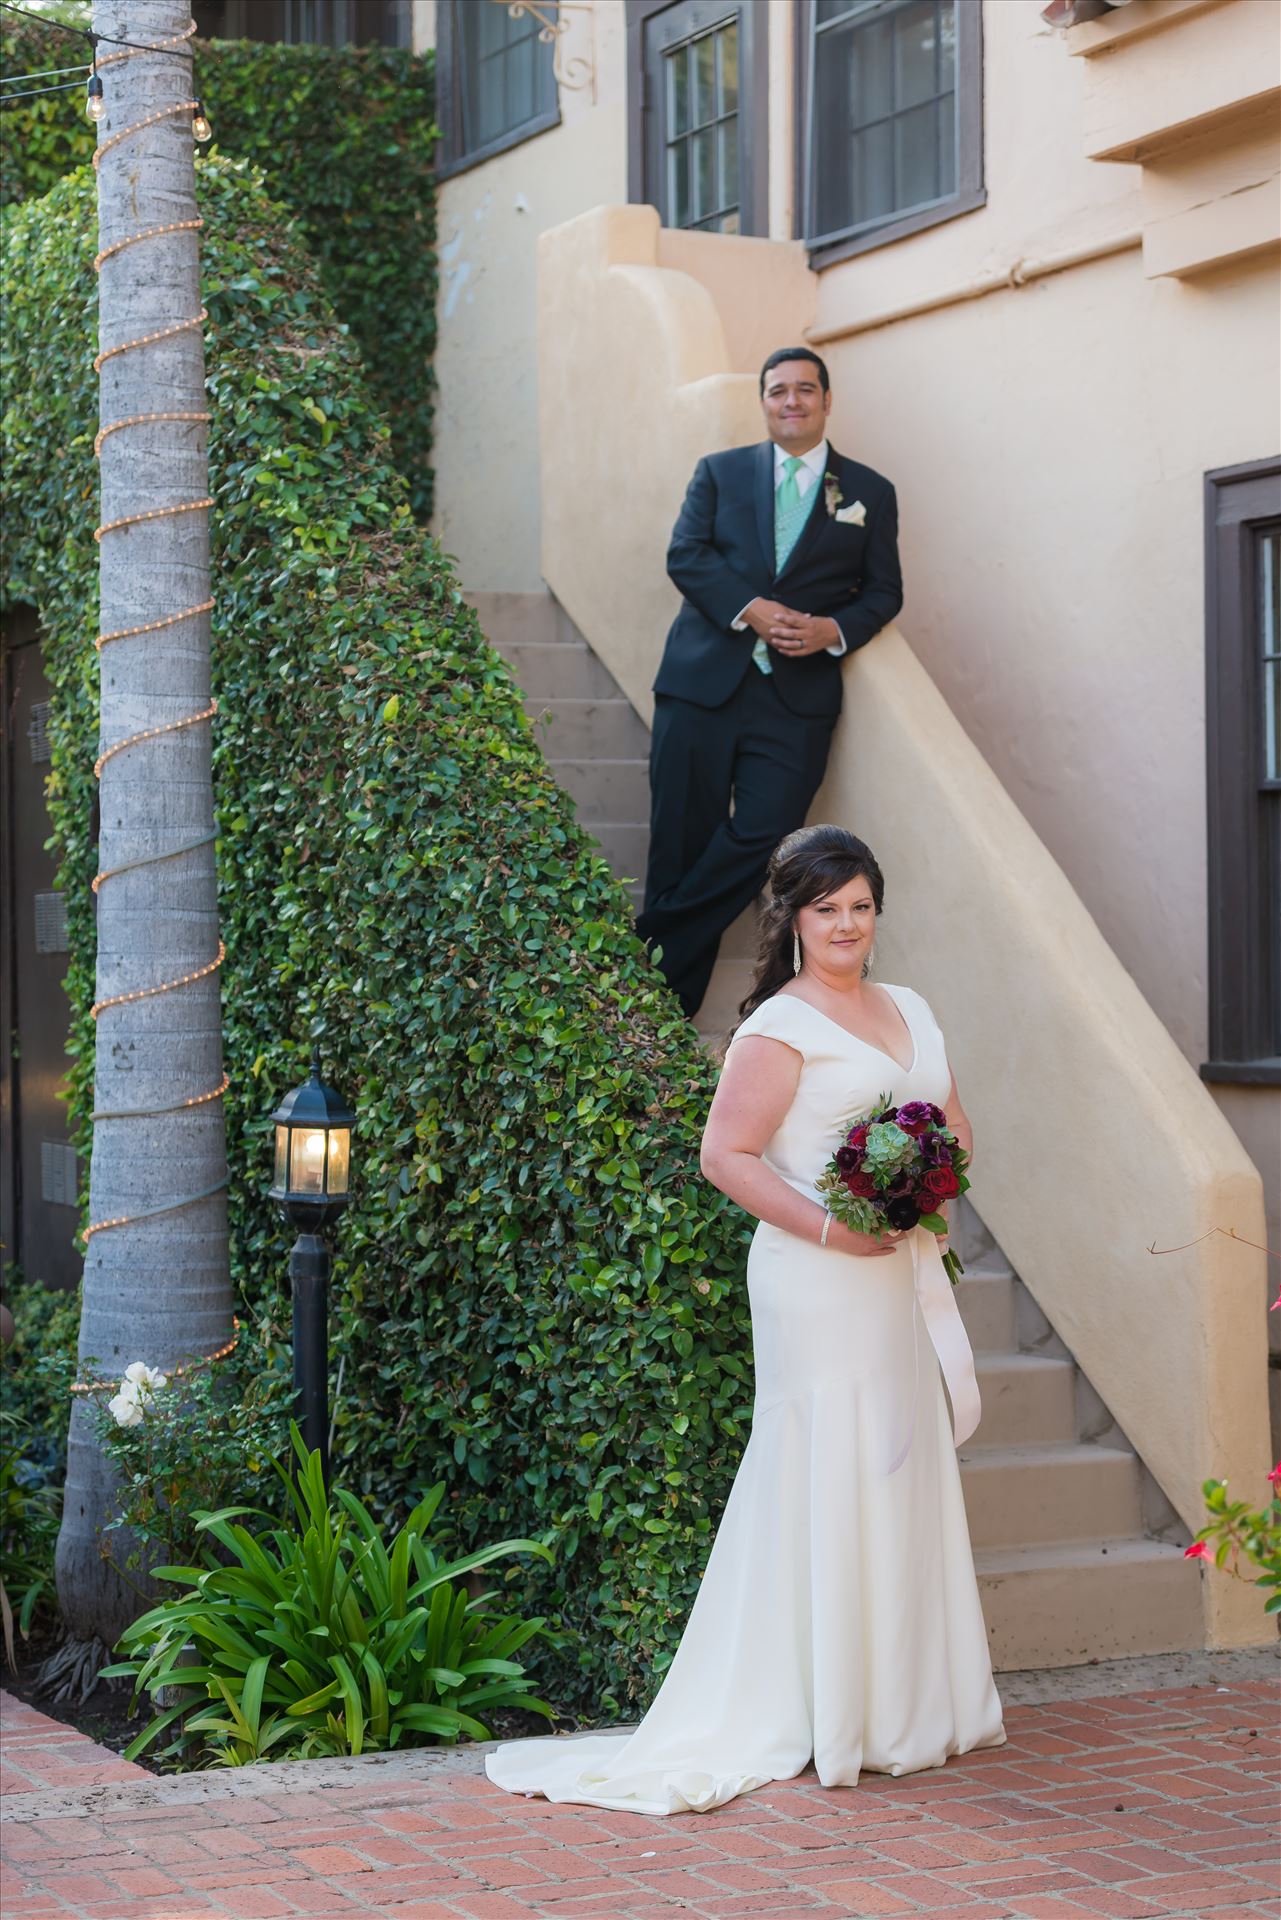 Mary and Alejandro 17 Wedding photography at the Historic Santa Maria Inn in Santa Maria, California by Mirror's Edge Photography. Bride and Groom on the Ivy Staircase. by Sarah Williams